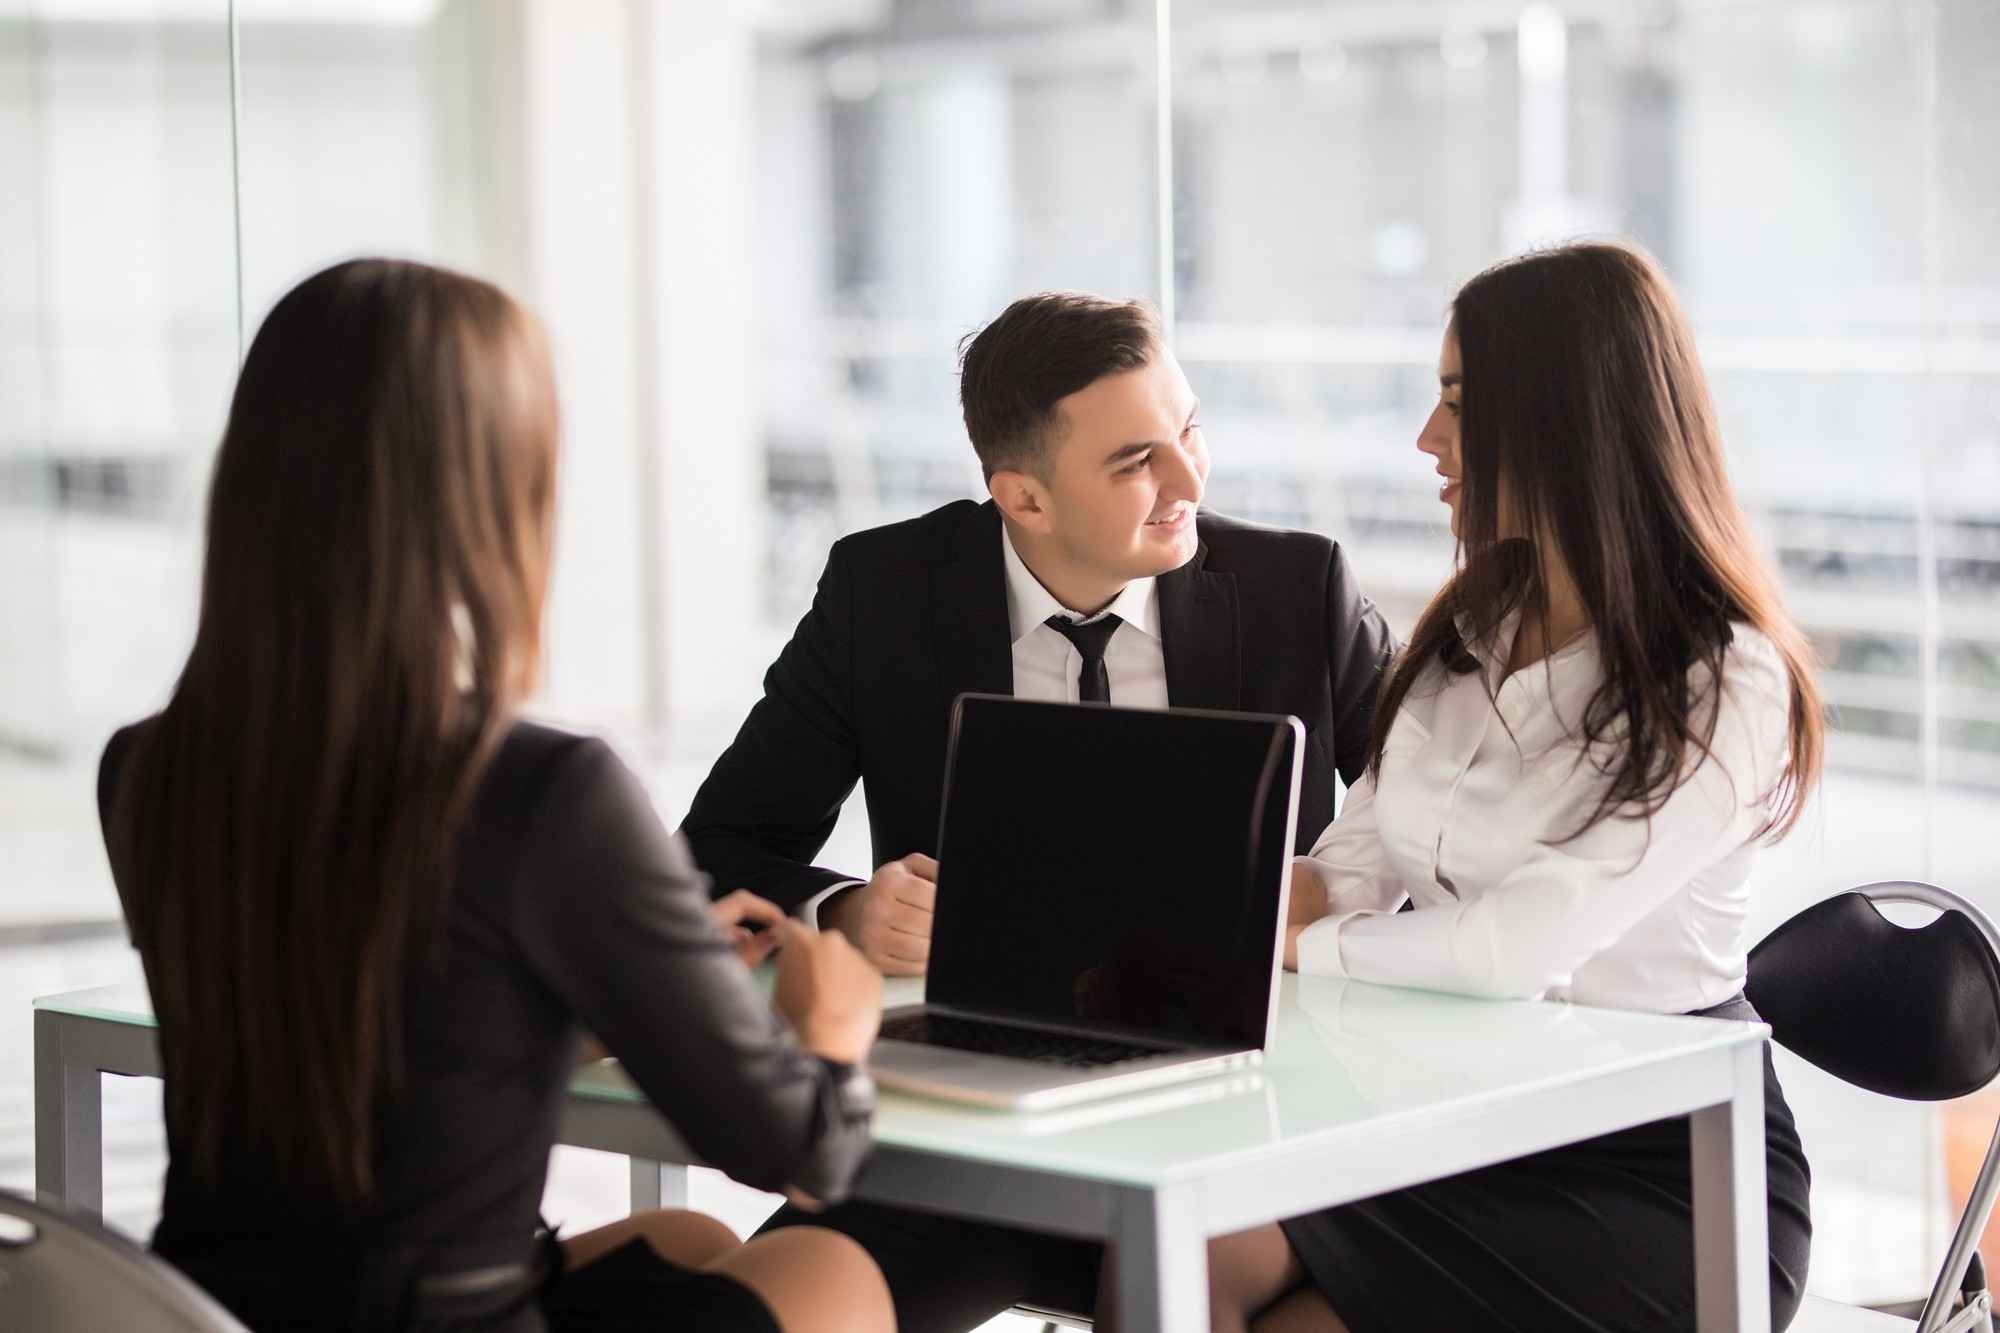 contract-with-best-conditions-confident-young-woman-explain-some-details-document-pointing-it-with-smile-while-sitting-together-with-young-couple-desk-office